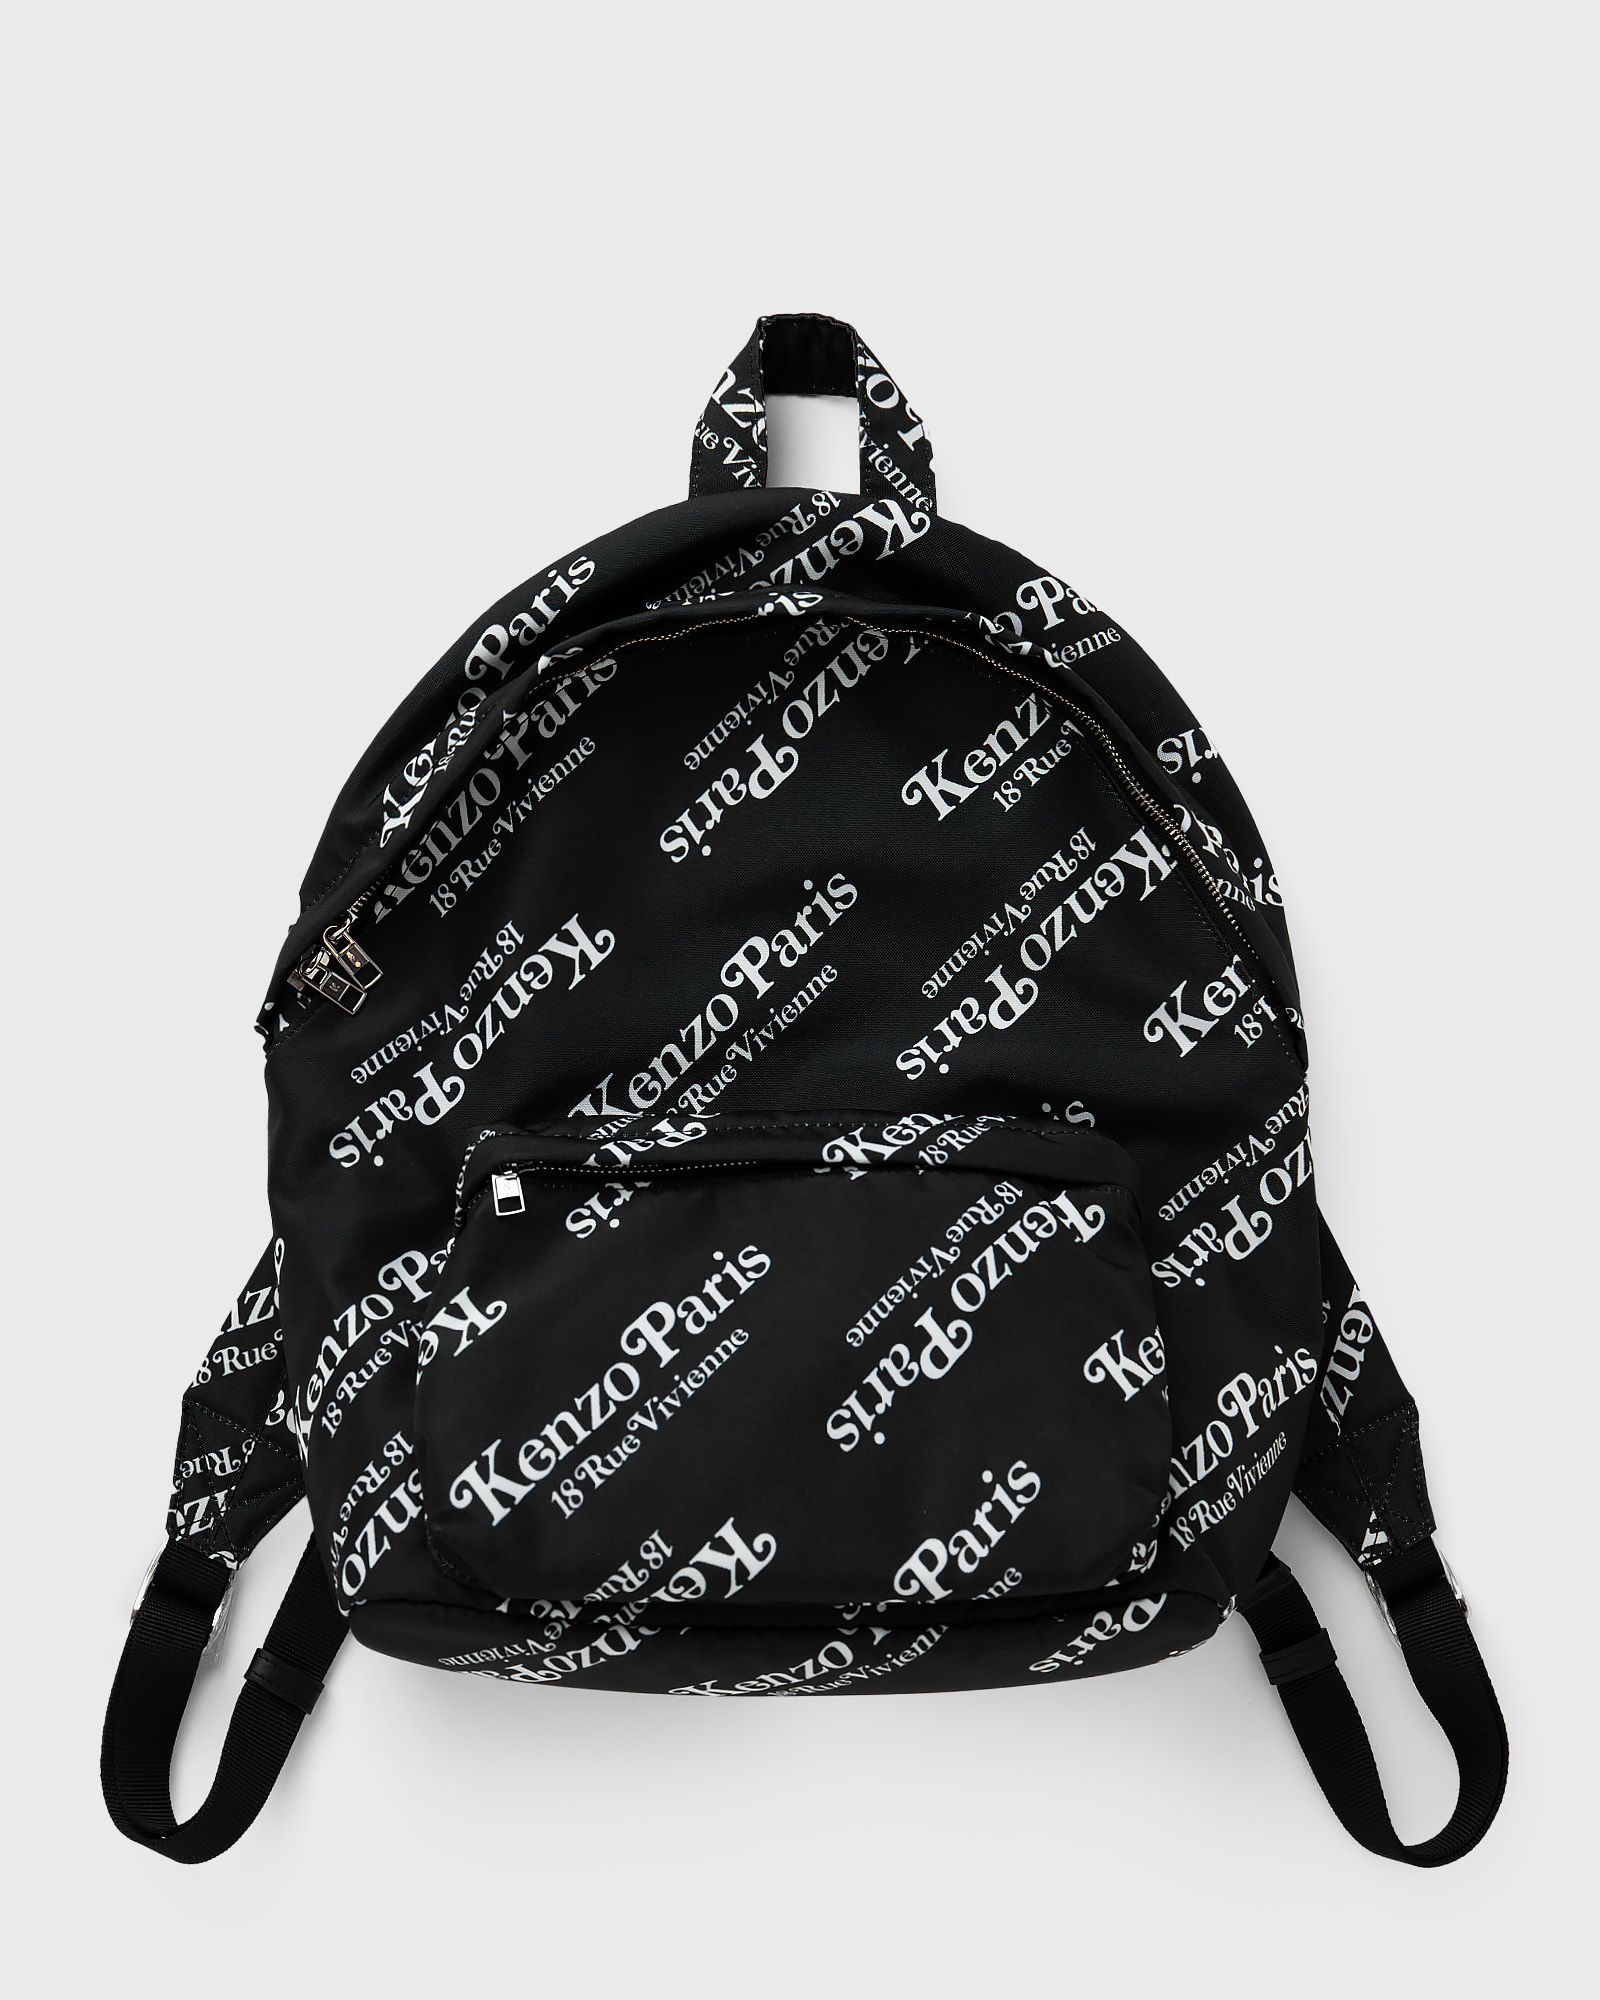 Kenzo x Verdy Collection Backpack men Backpacks black|white in Größe:ONE SIZE von Kenzo